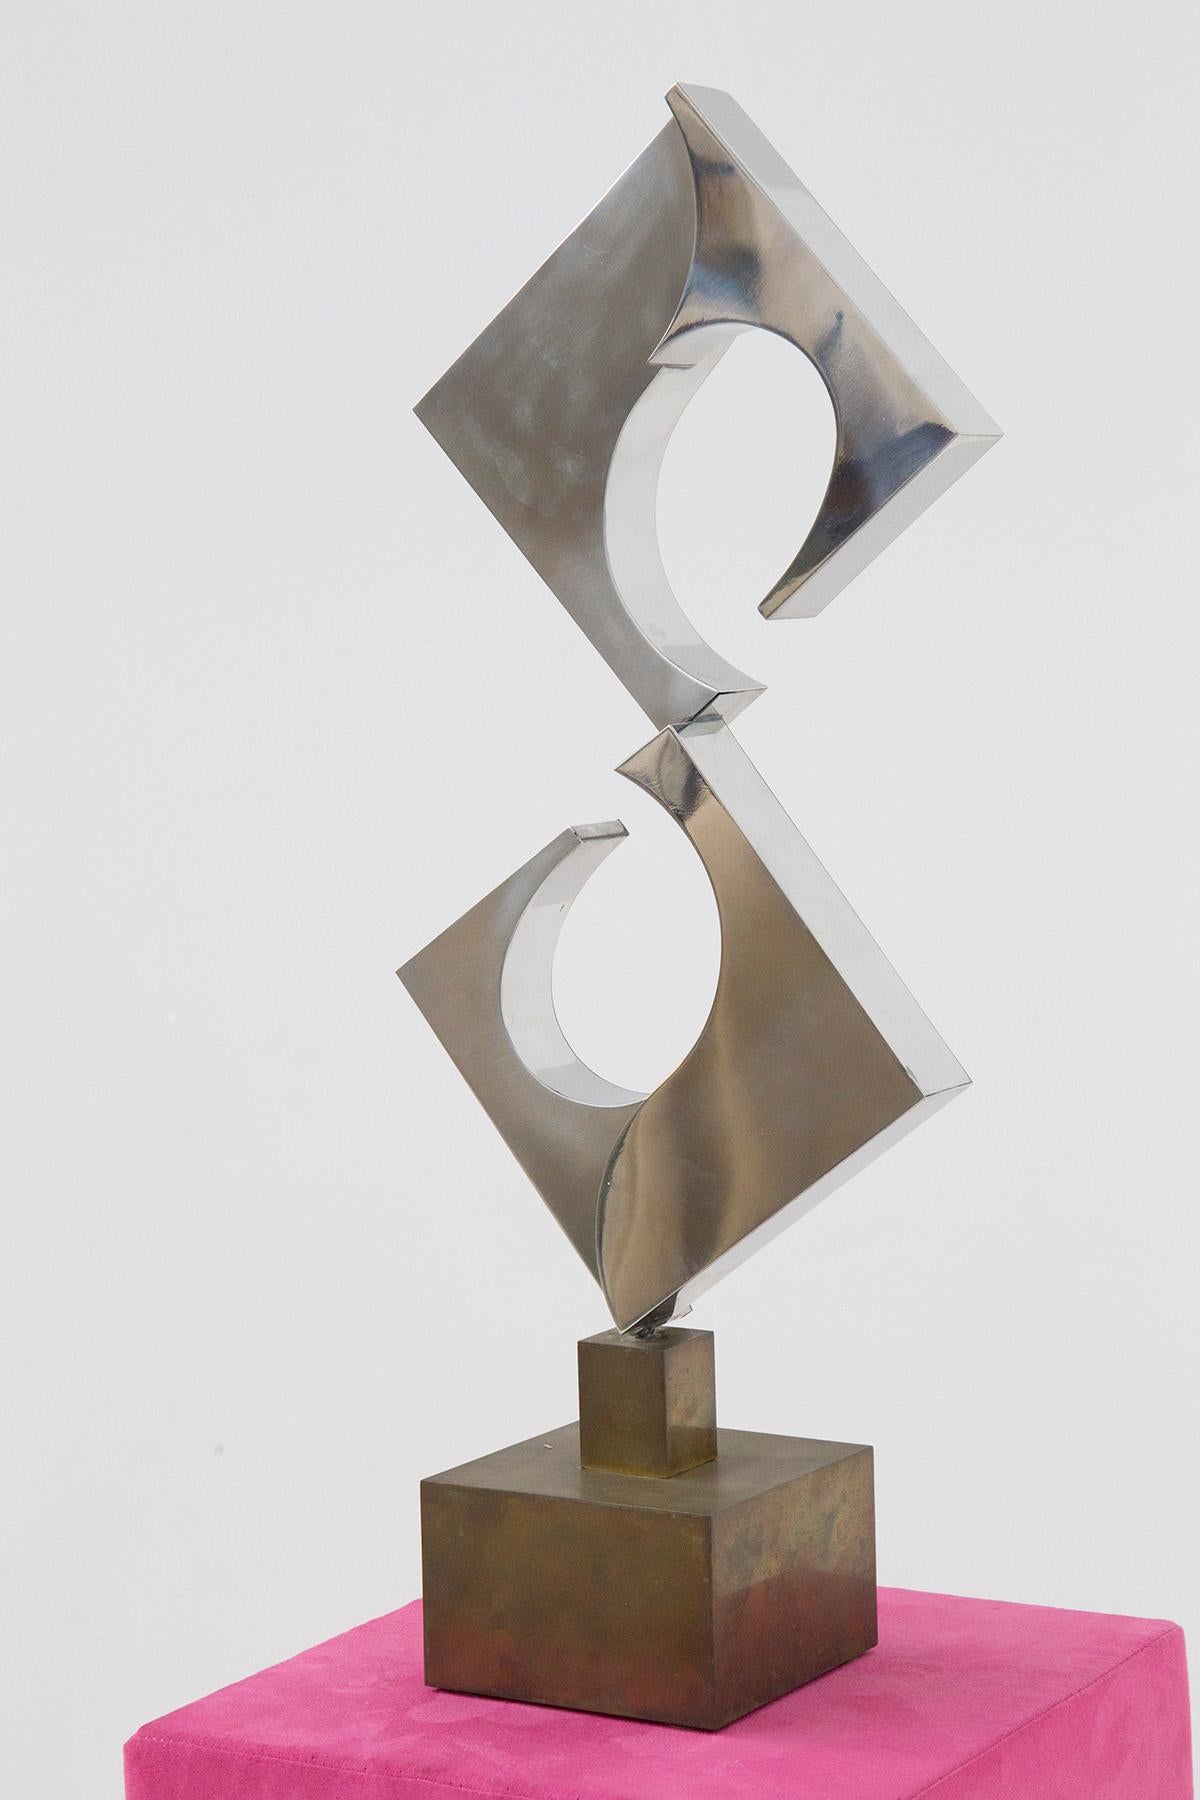 Futurist sculpture by master sculptor Cappello Carmelo entitled Triangular Spiral. Edition 5 of 6 of 1978, signature and year engraved underneath the sculpture. The work is a futurist depiction of architectural sculpture. The forms are vibrant and